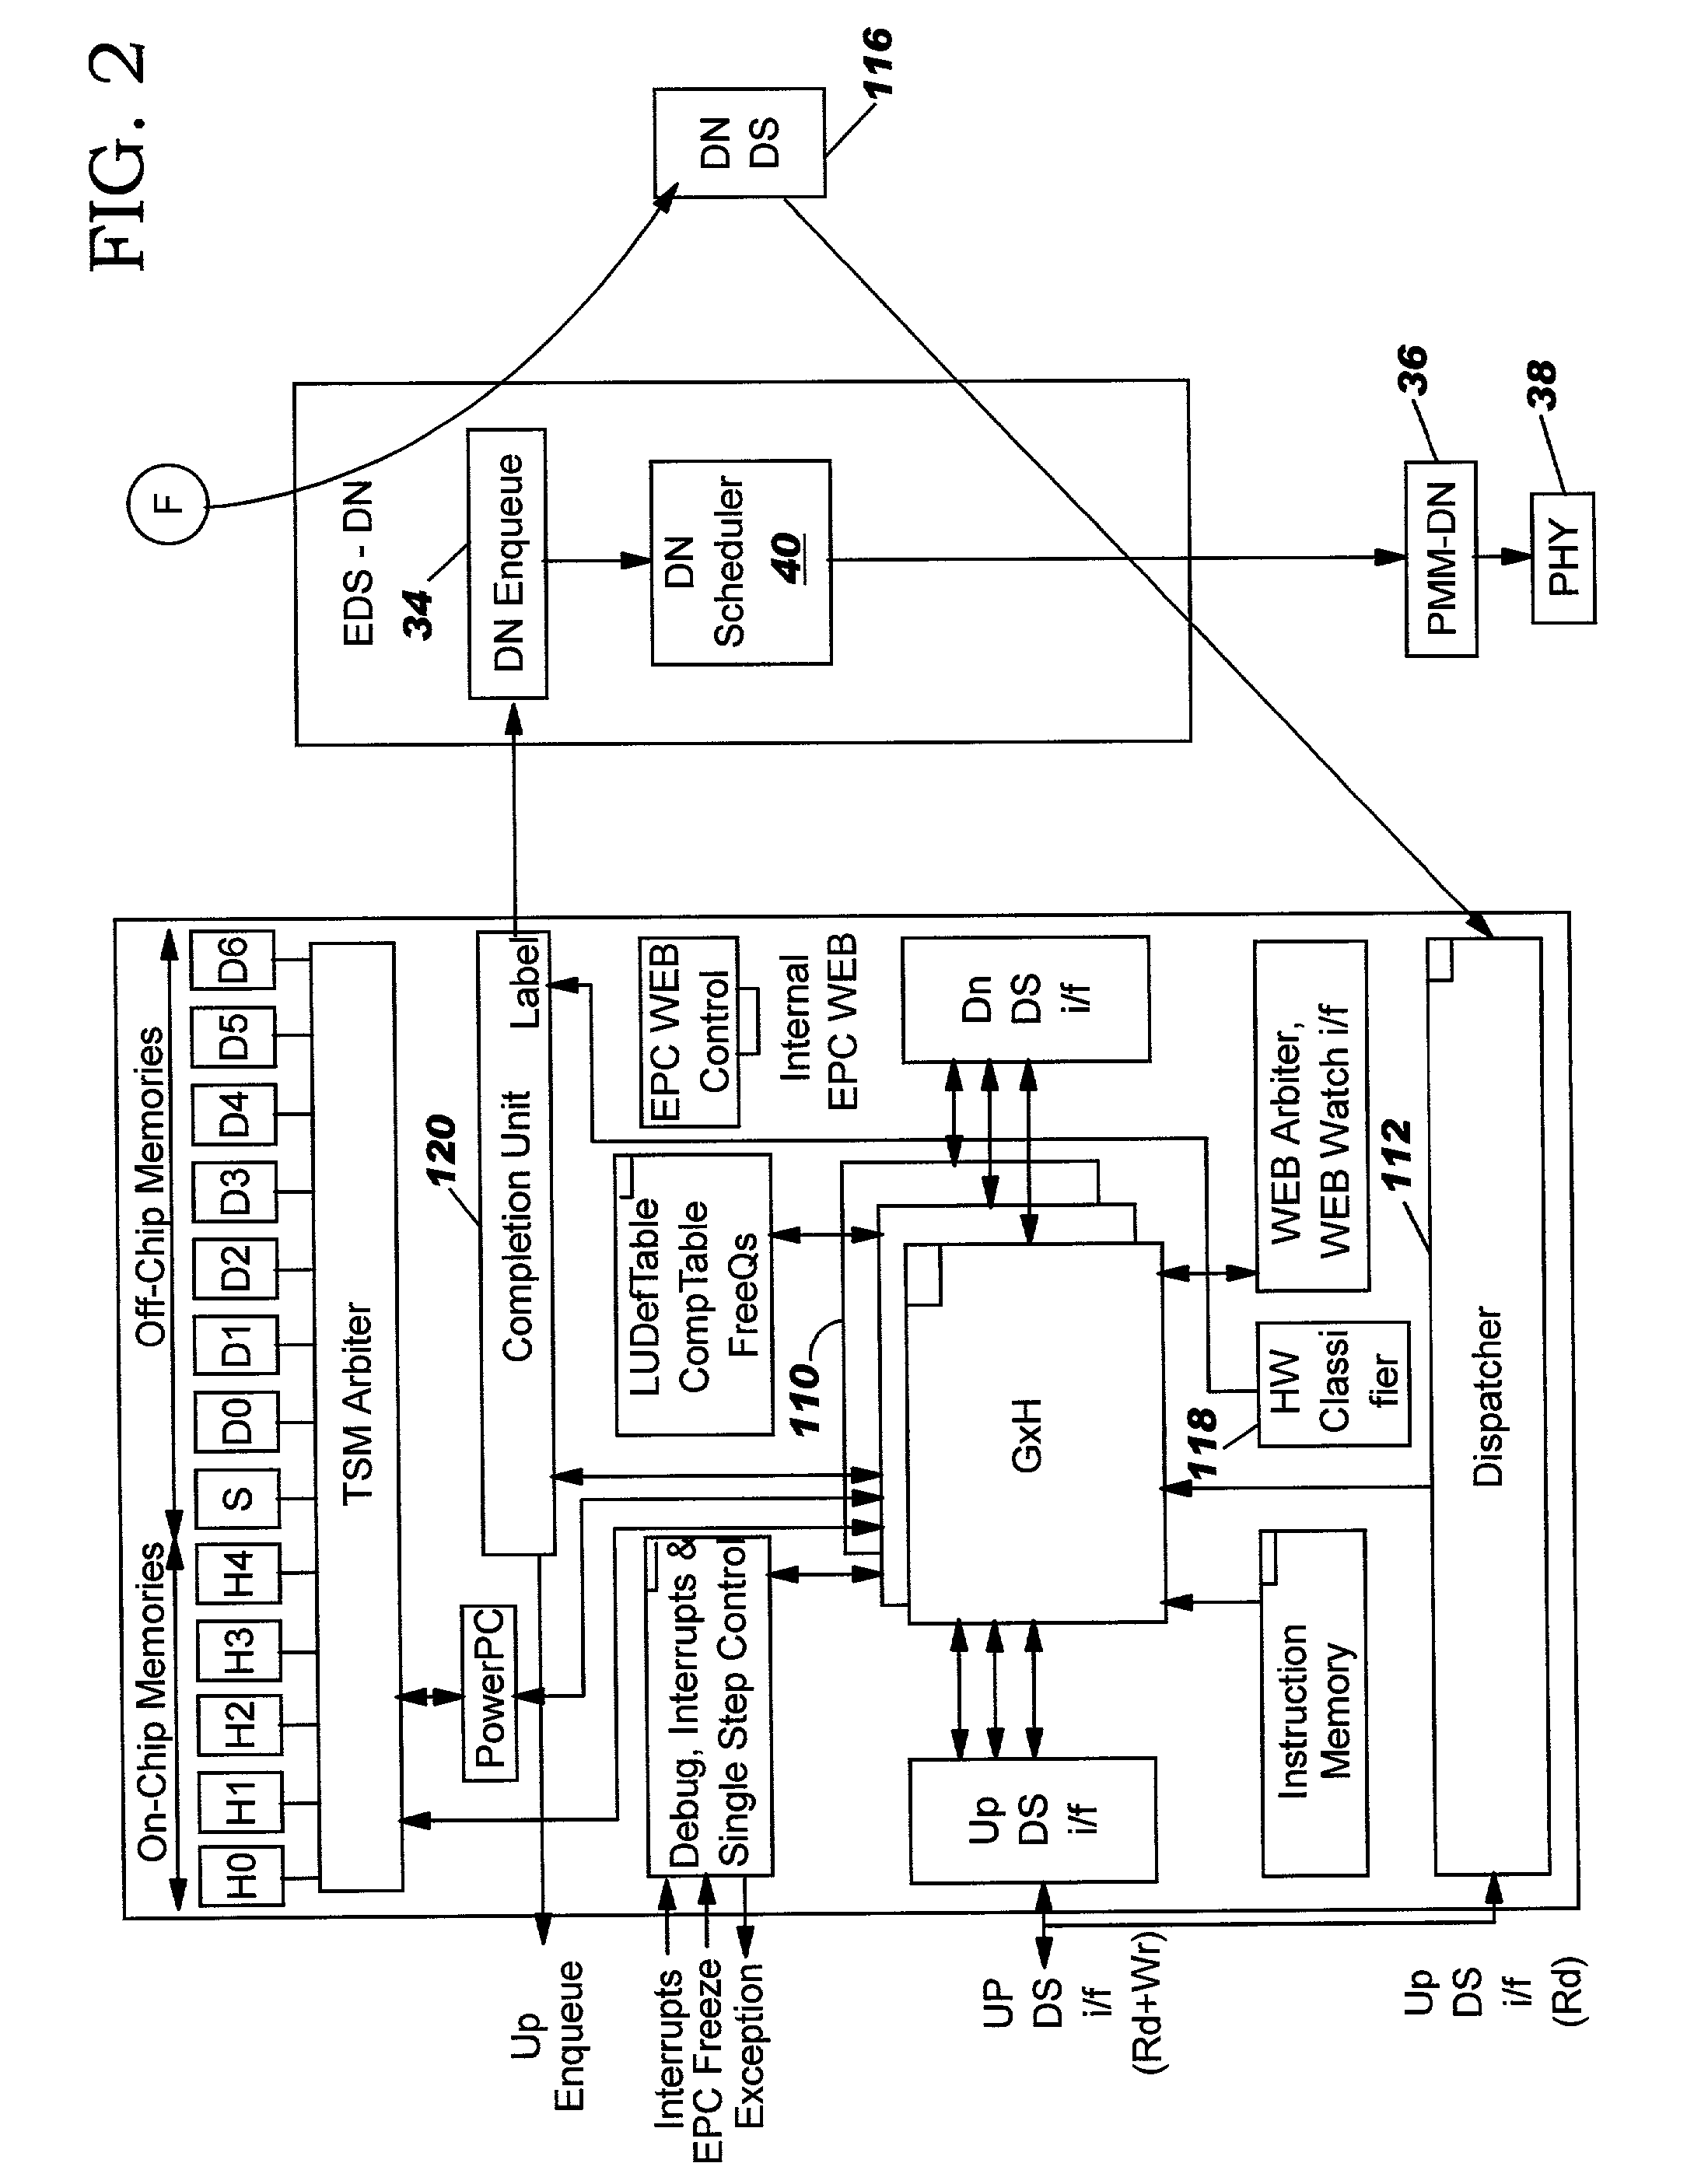 Method and system for network processor scheduling based on service levels